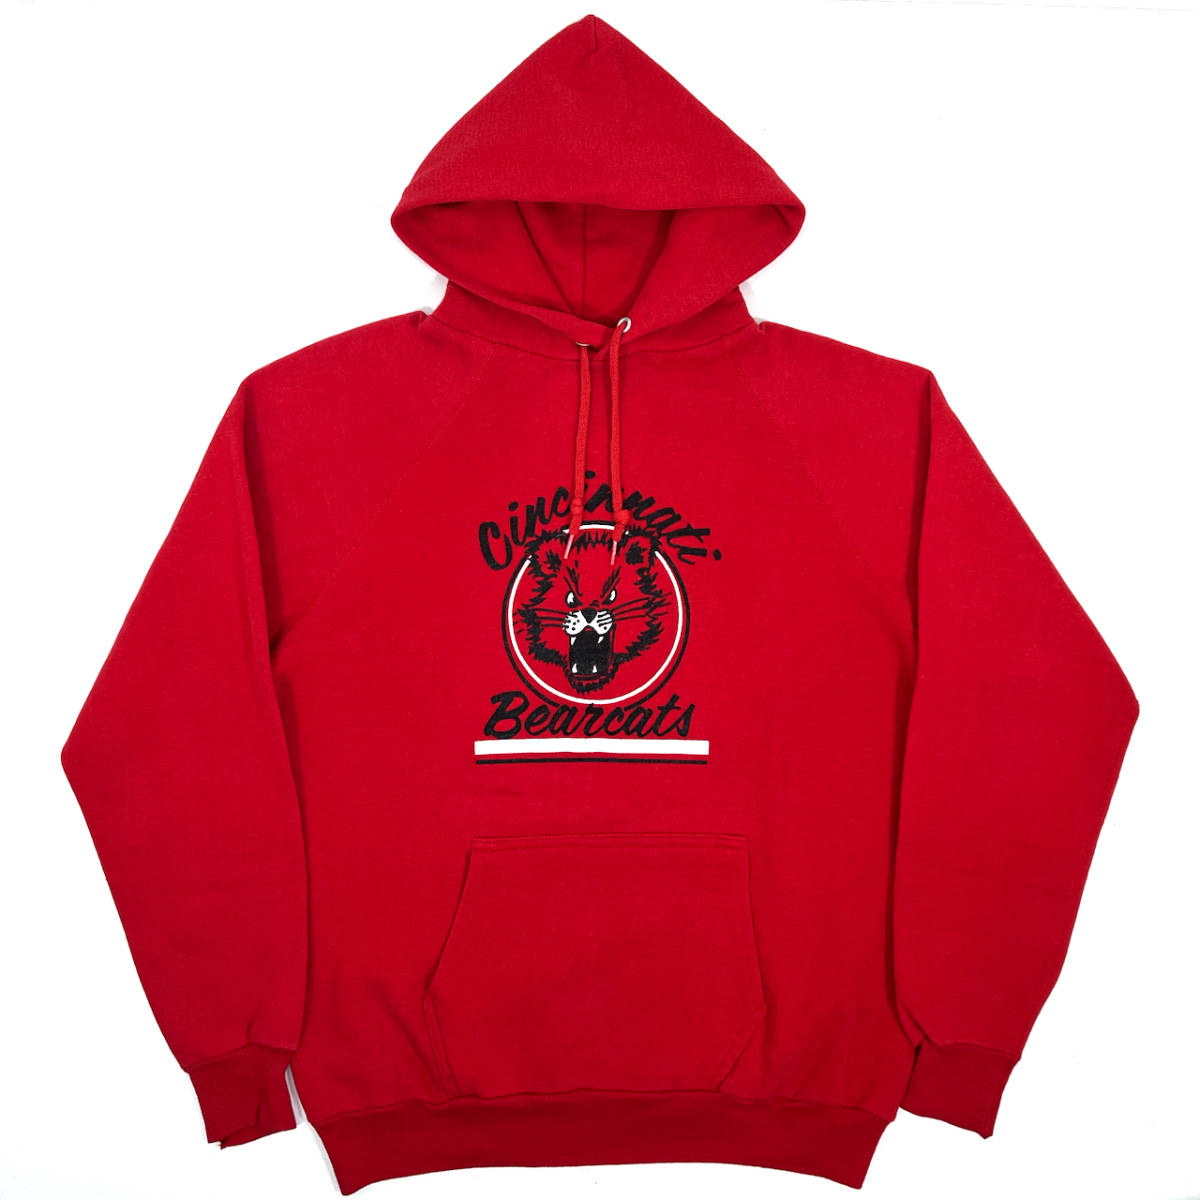 USA製 1980s H.WOLF&SONS Sweat hoodie L Red ヴィンテージ スウェットフーディー パーカ カレッジ 三段プリント レッド 赤